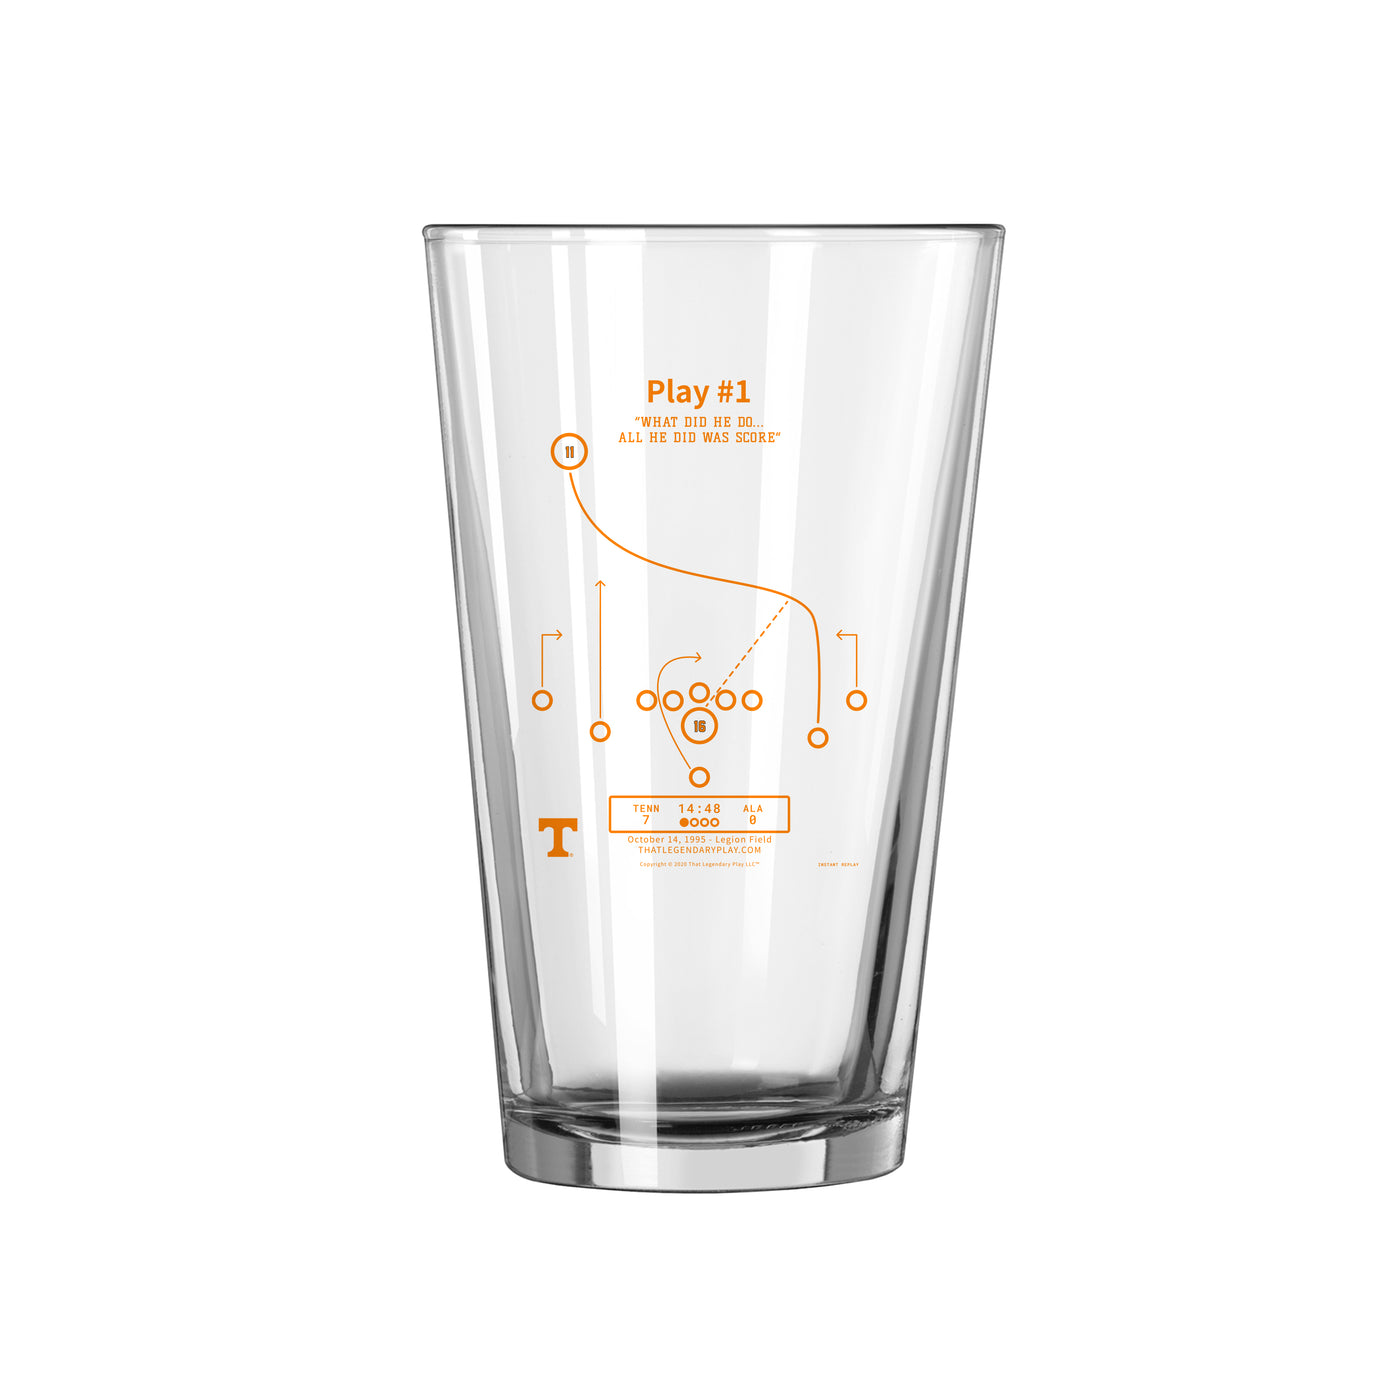 Tennessee Legendary Play Play #1 16oz Pint Glass